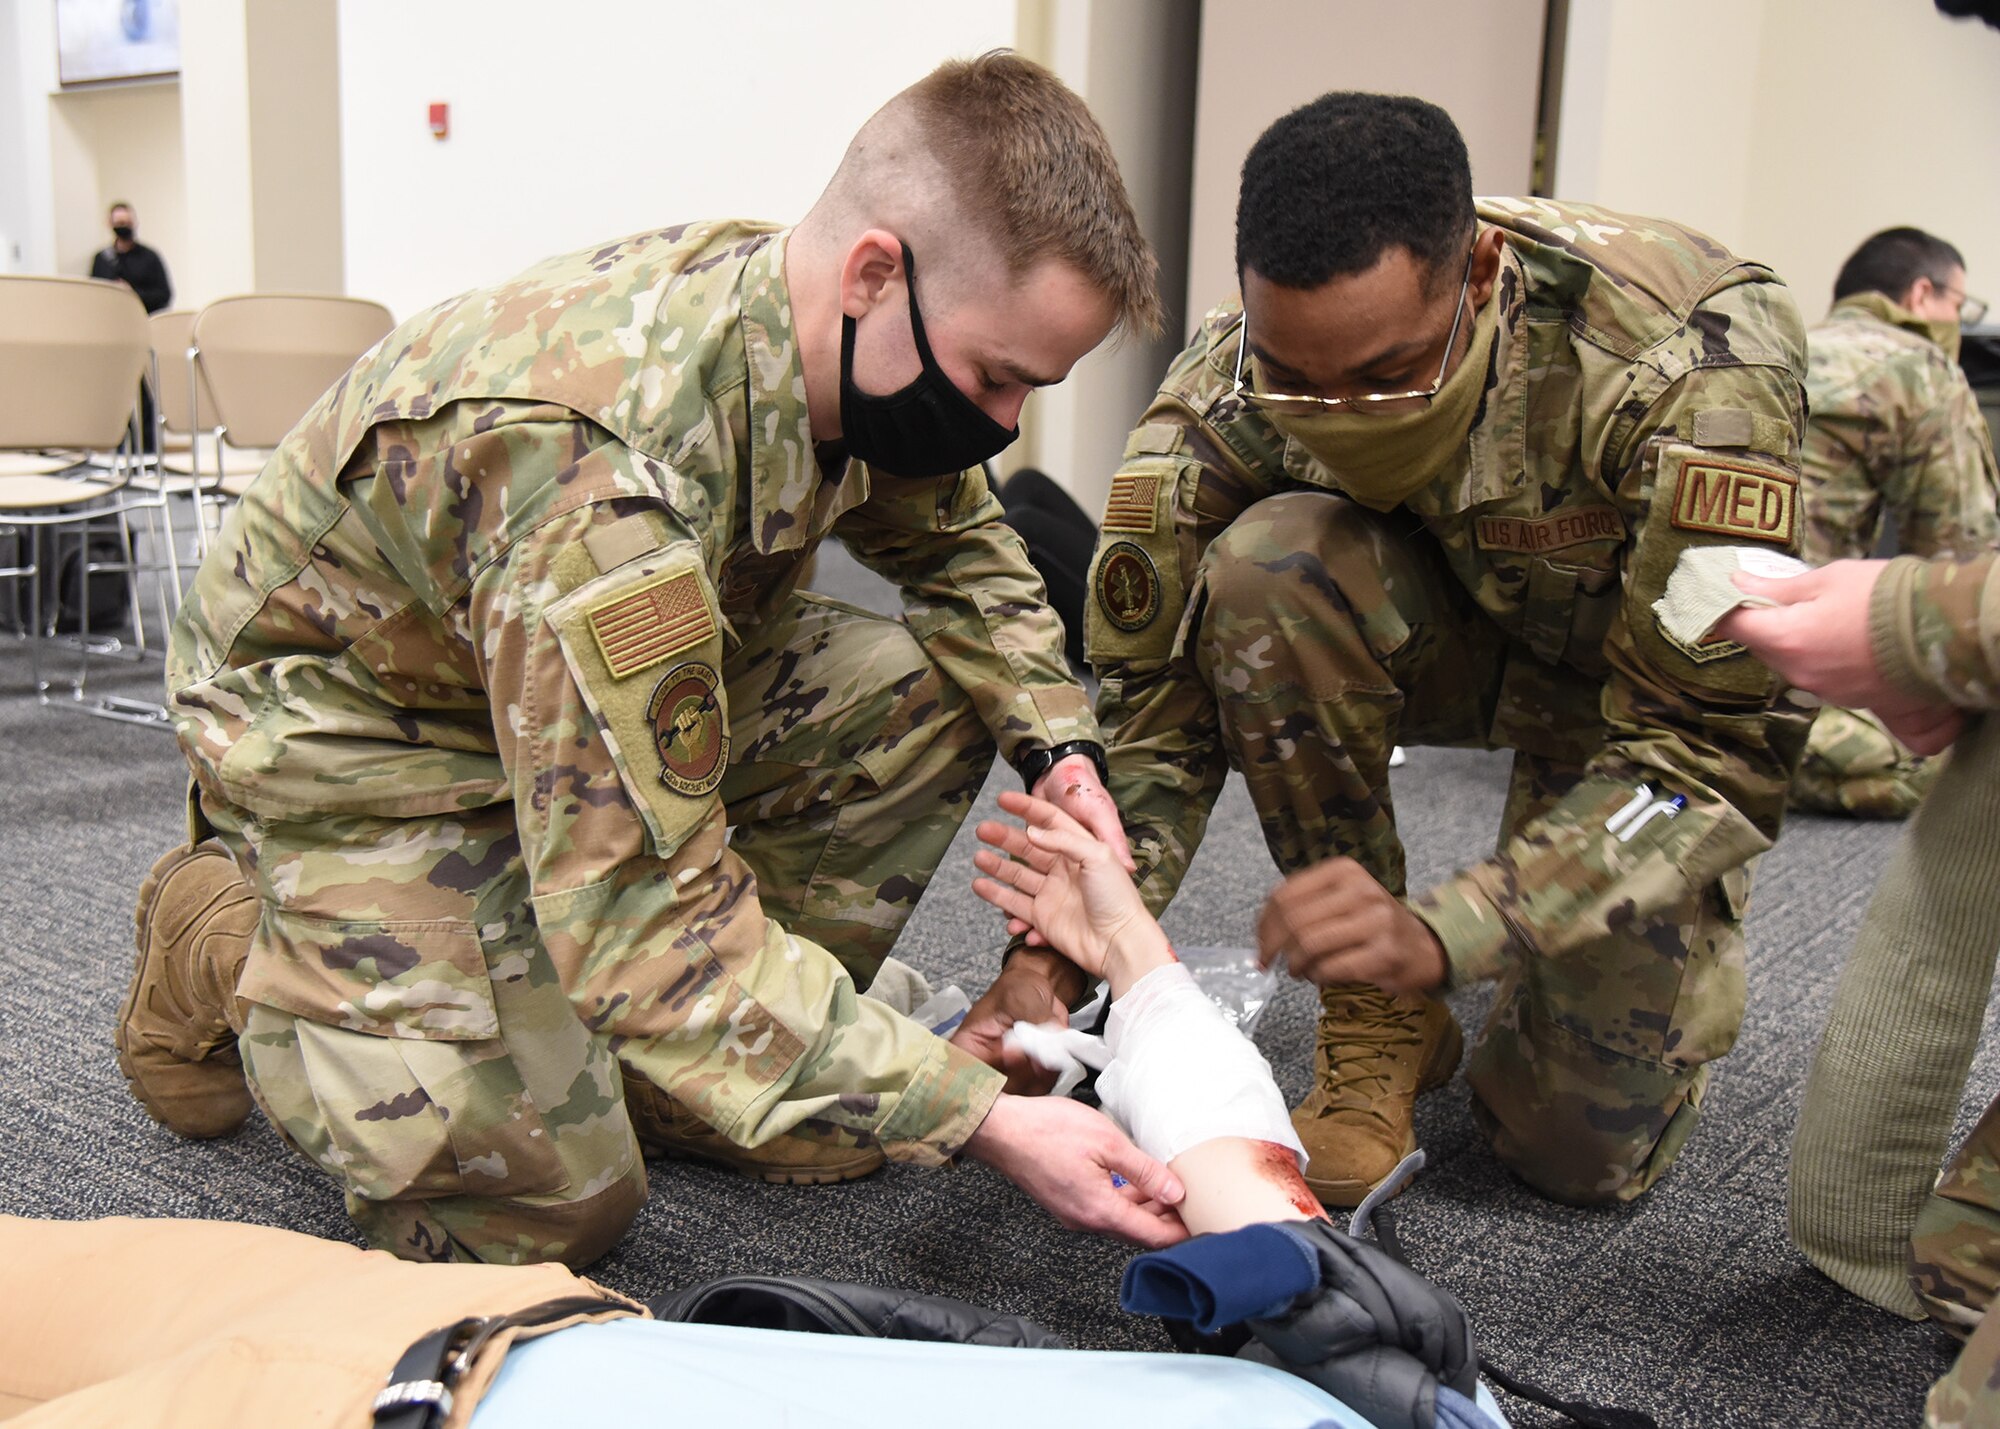 Two Airmen kneel and wrap a person's arm with gauze.